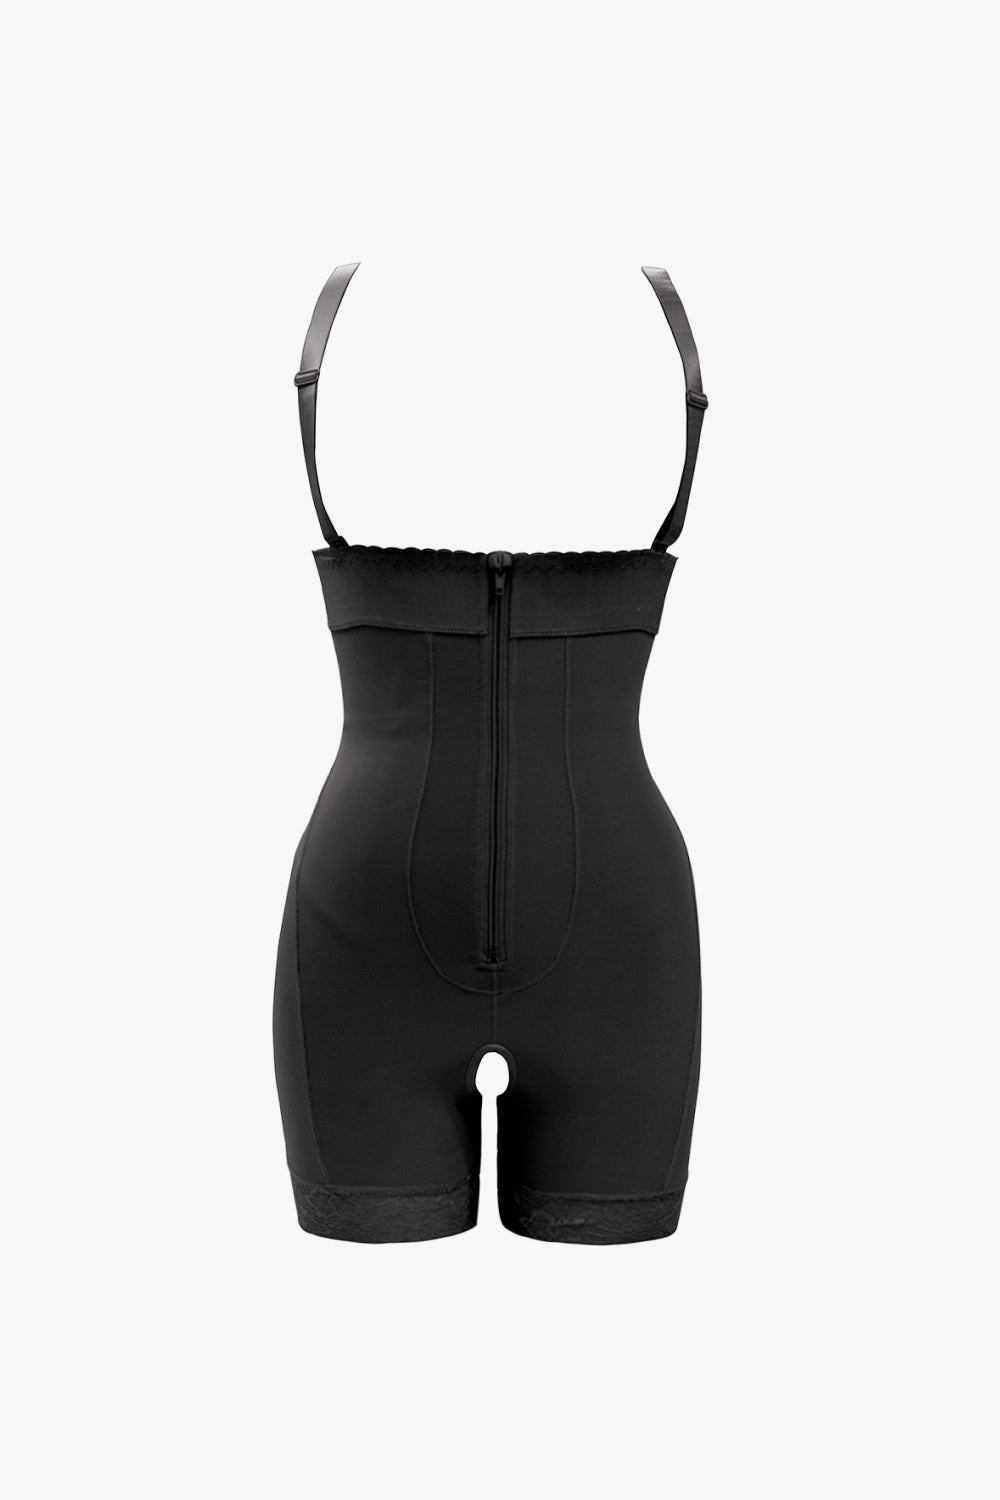 Full Size Zip Up Under-Bust Shaping Bodysuit - Shapewear - FITGGINS